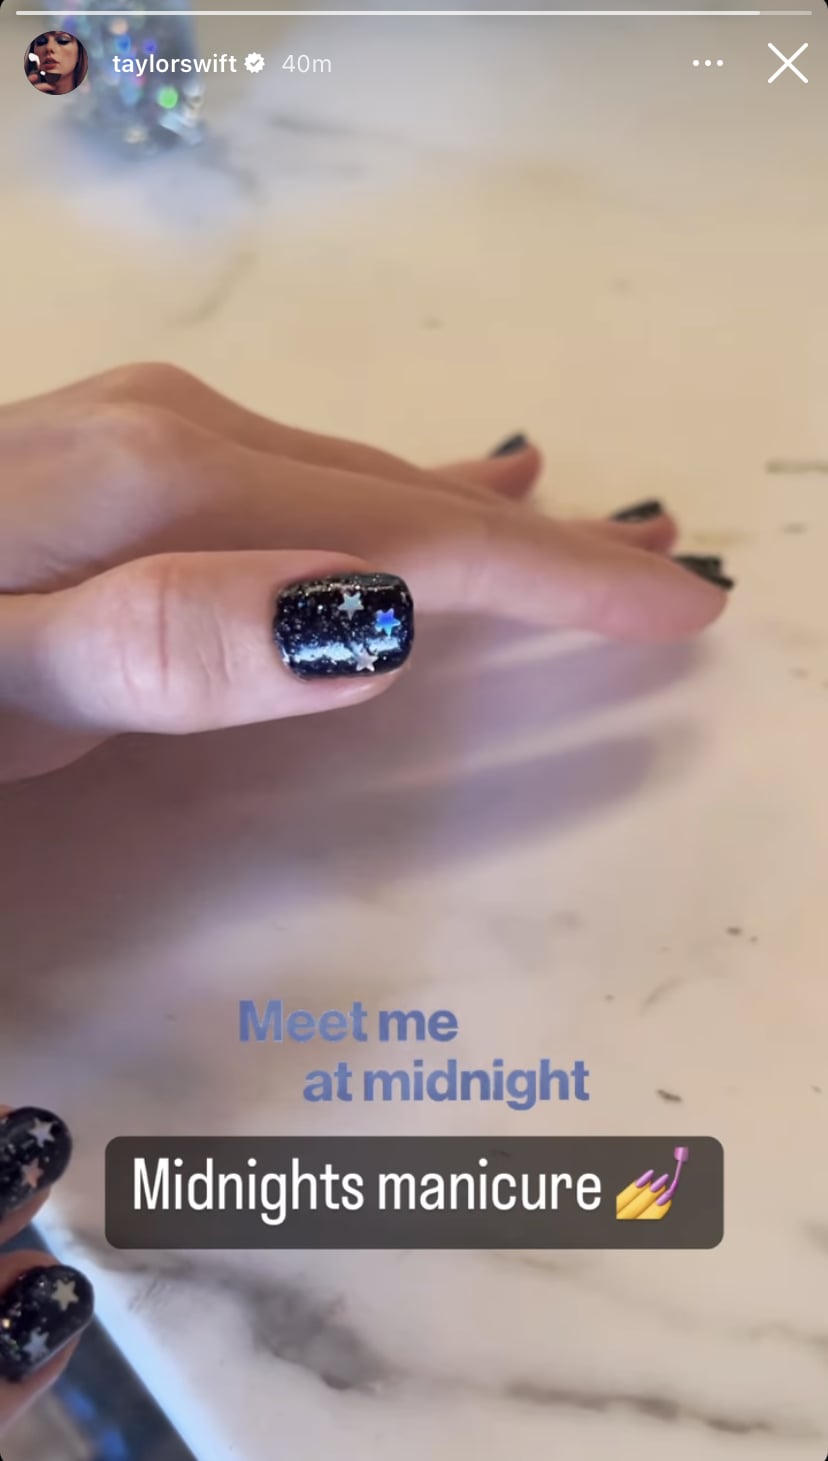 Taylor Swift's Midnights Manicure With Star Nail Art | POPSUGAR Beauty